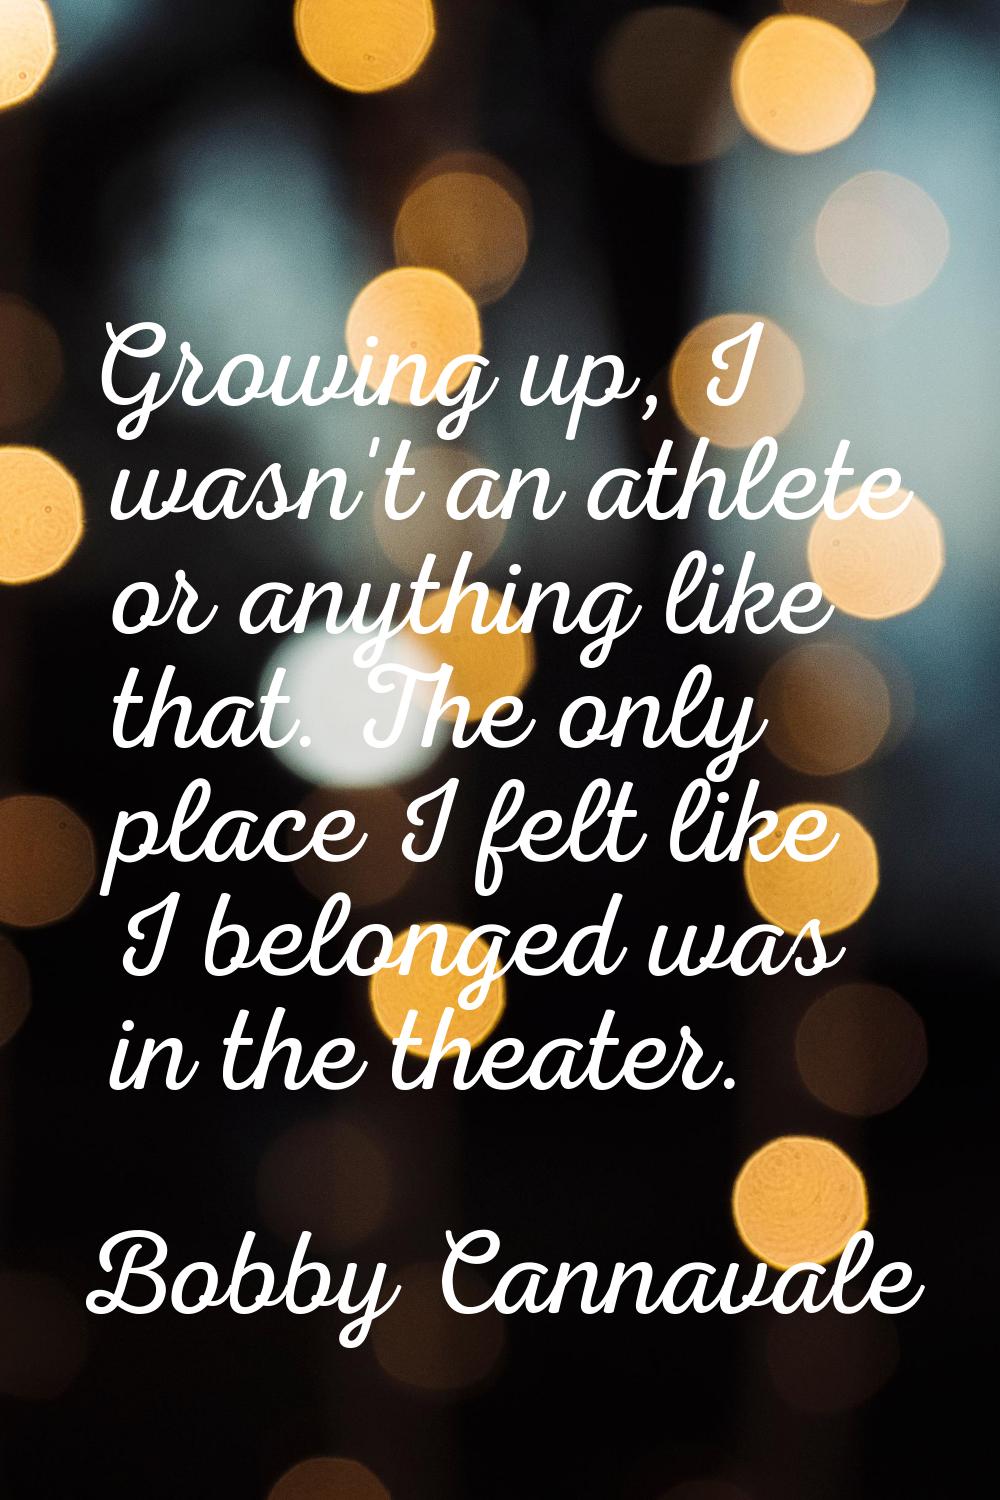 Growing up, I wasn't an athlete or anything like that. The only place I felt like I belonged was in